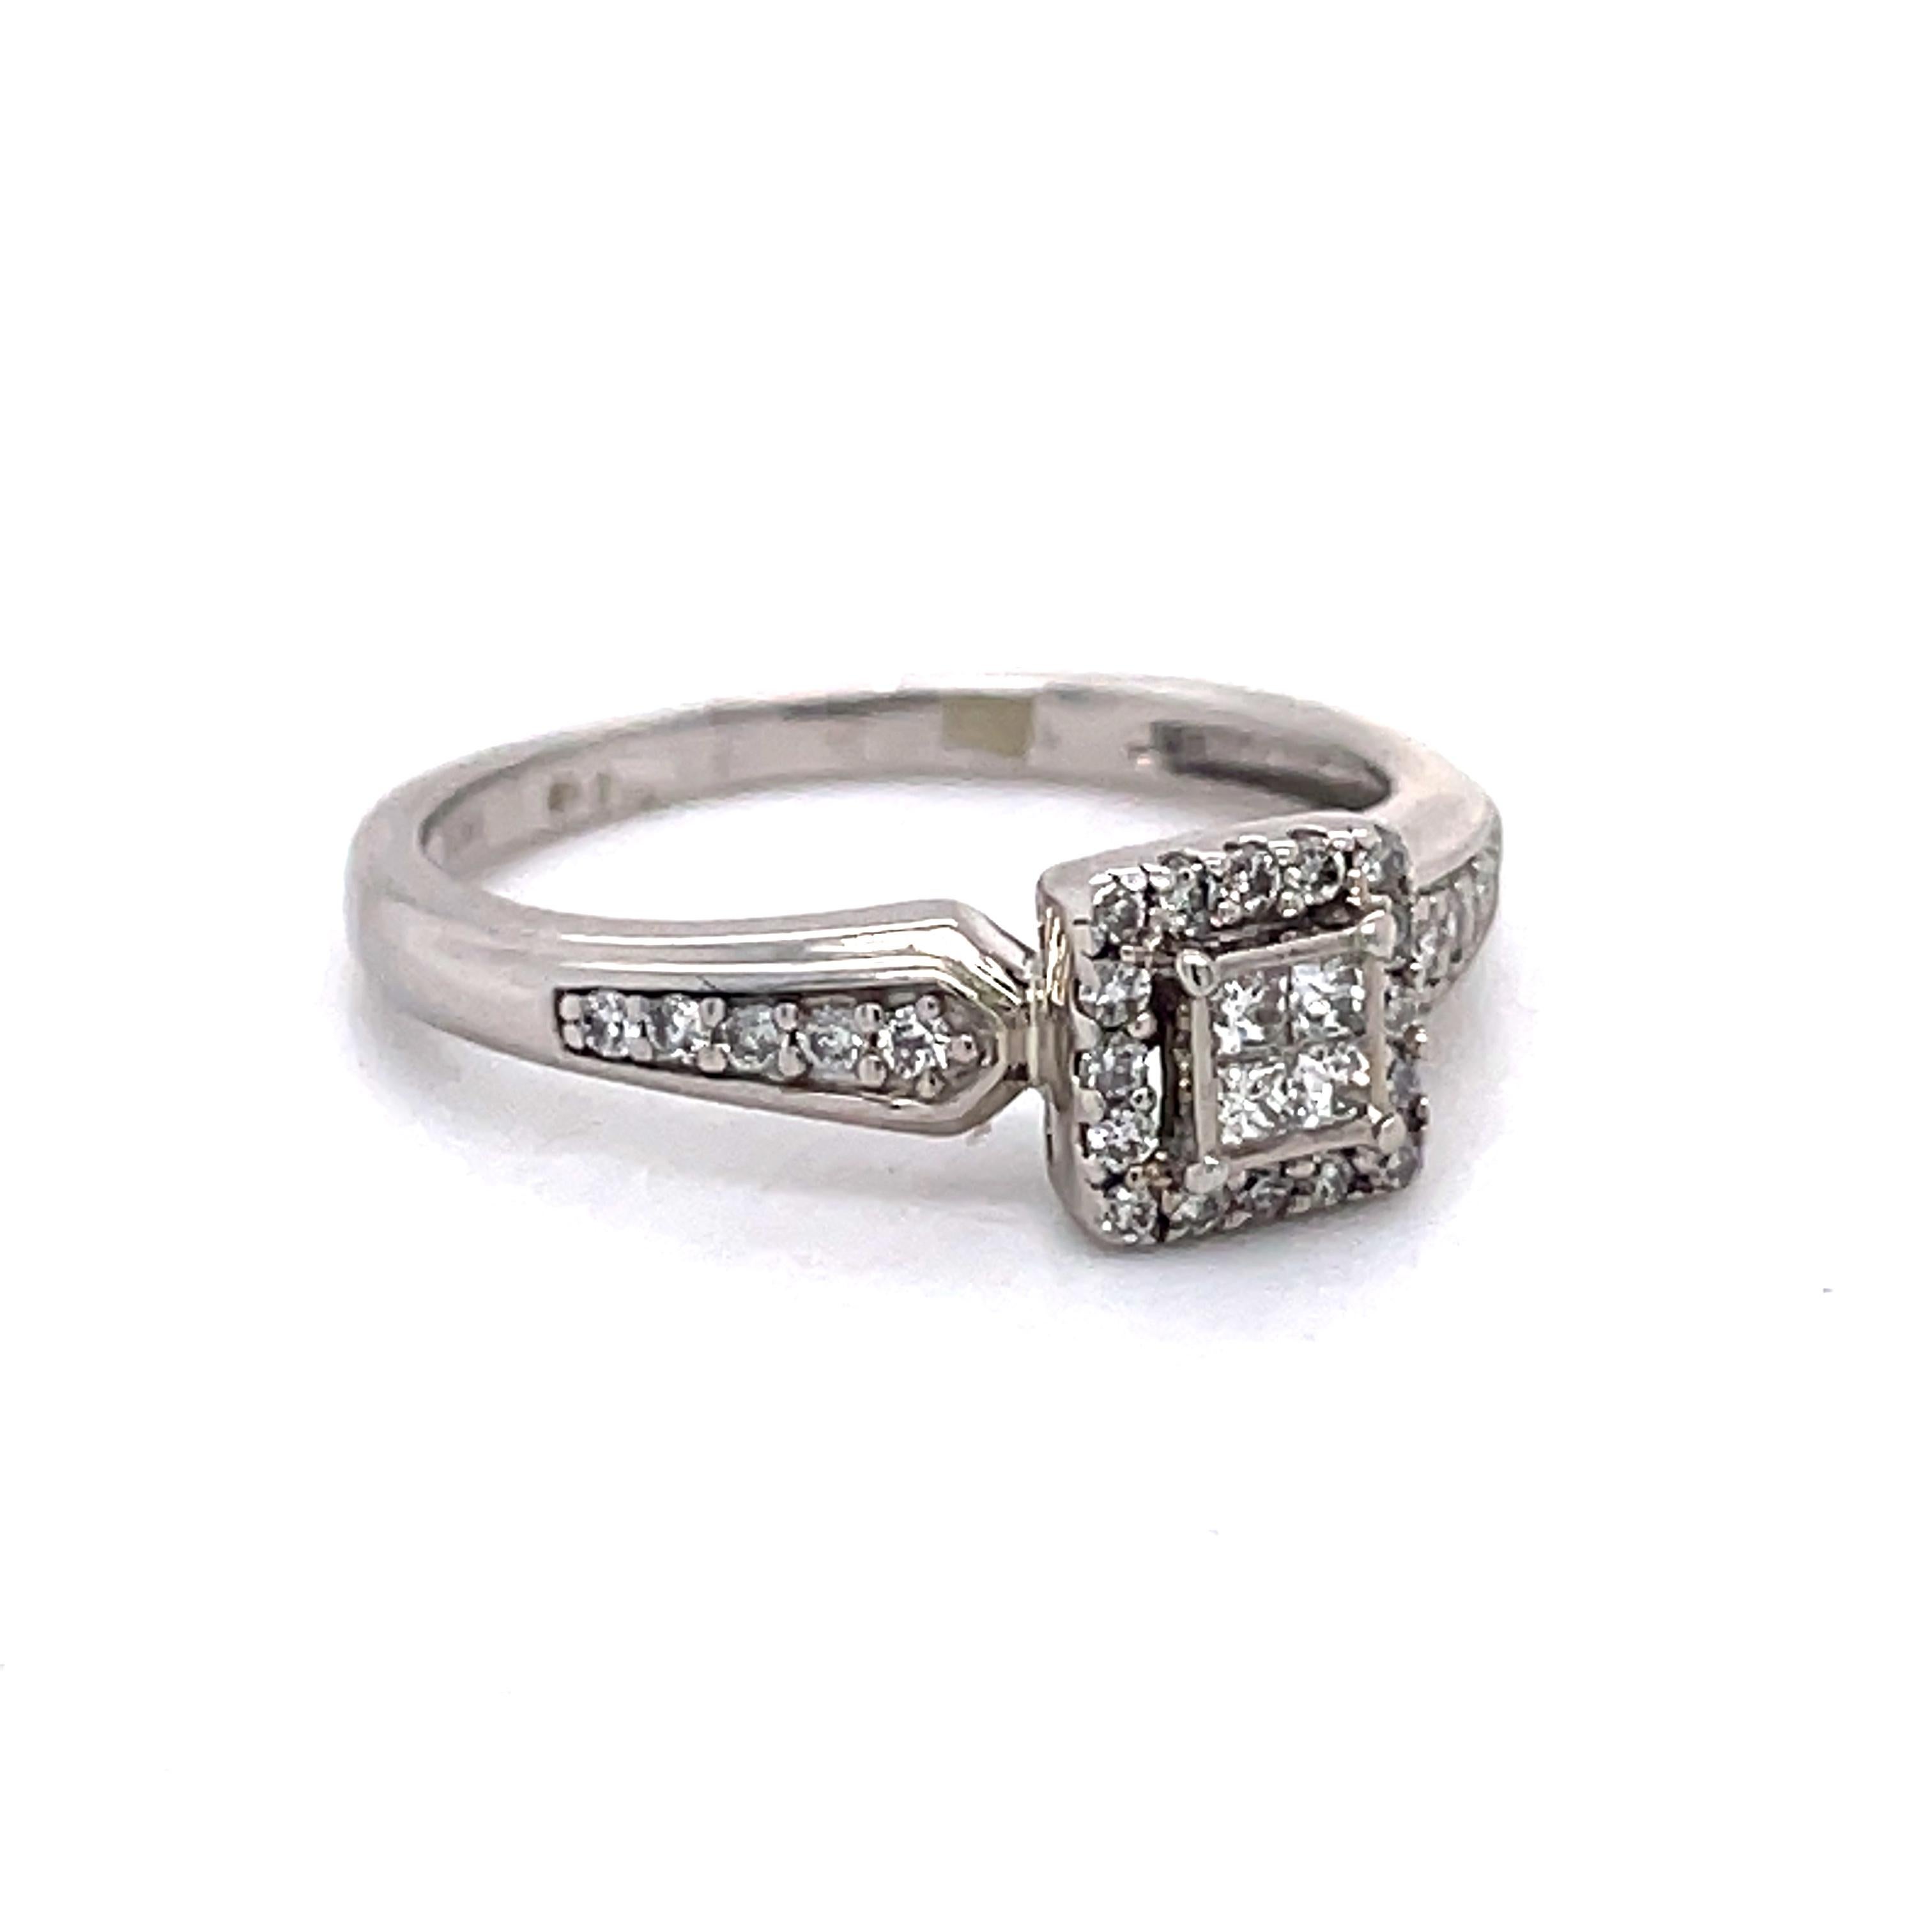 Vintage princess cut ring, dainty ring, 10K, 0.17ct diamonds, gold promise ring For Sale 2